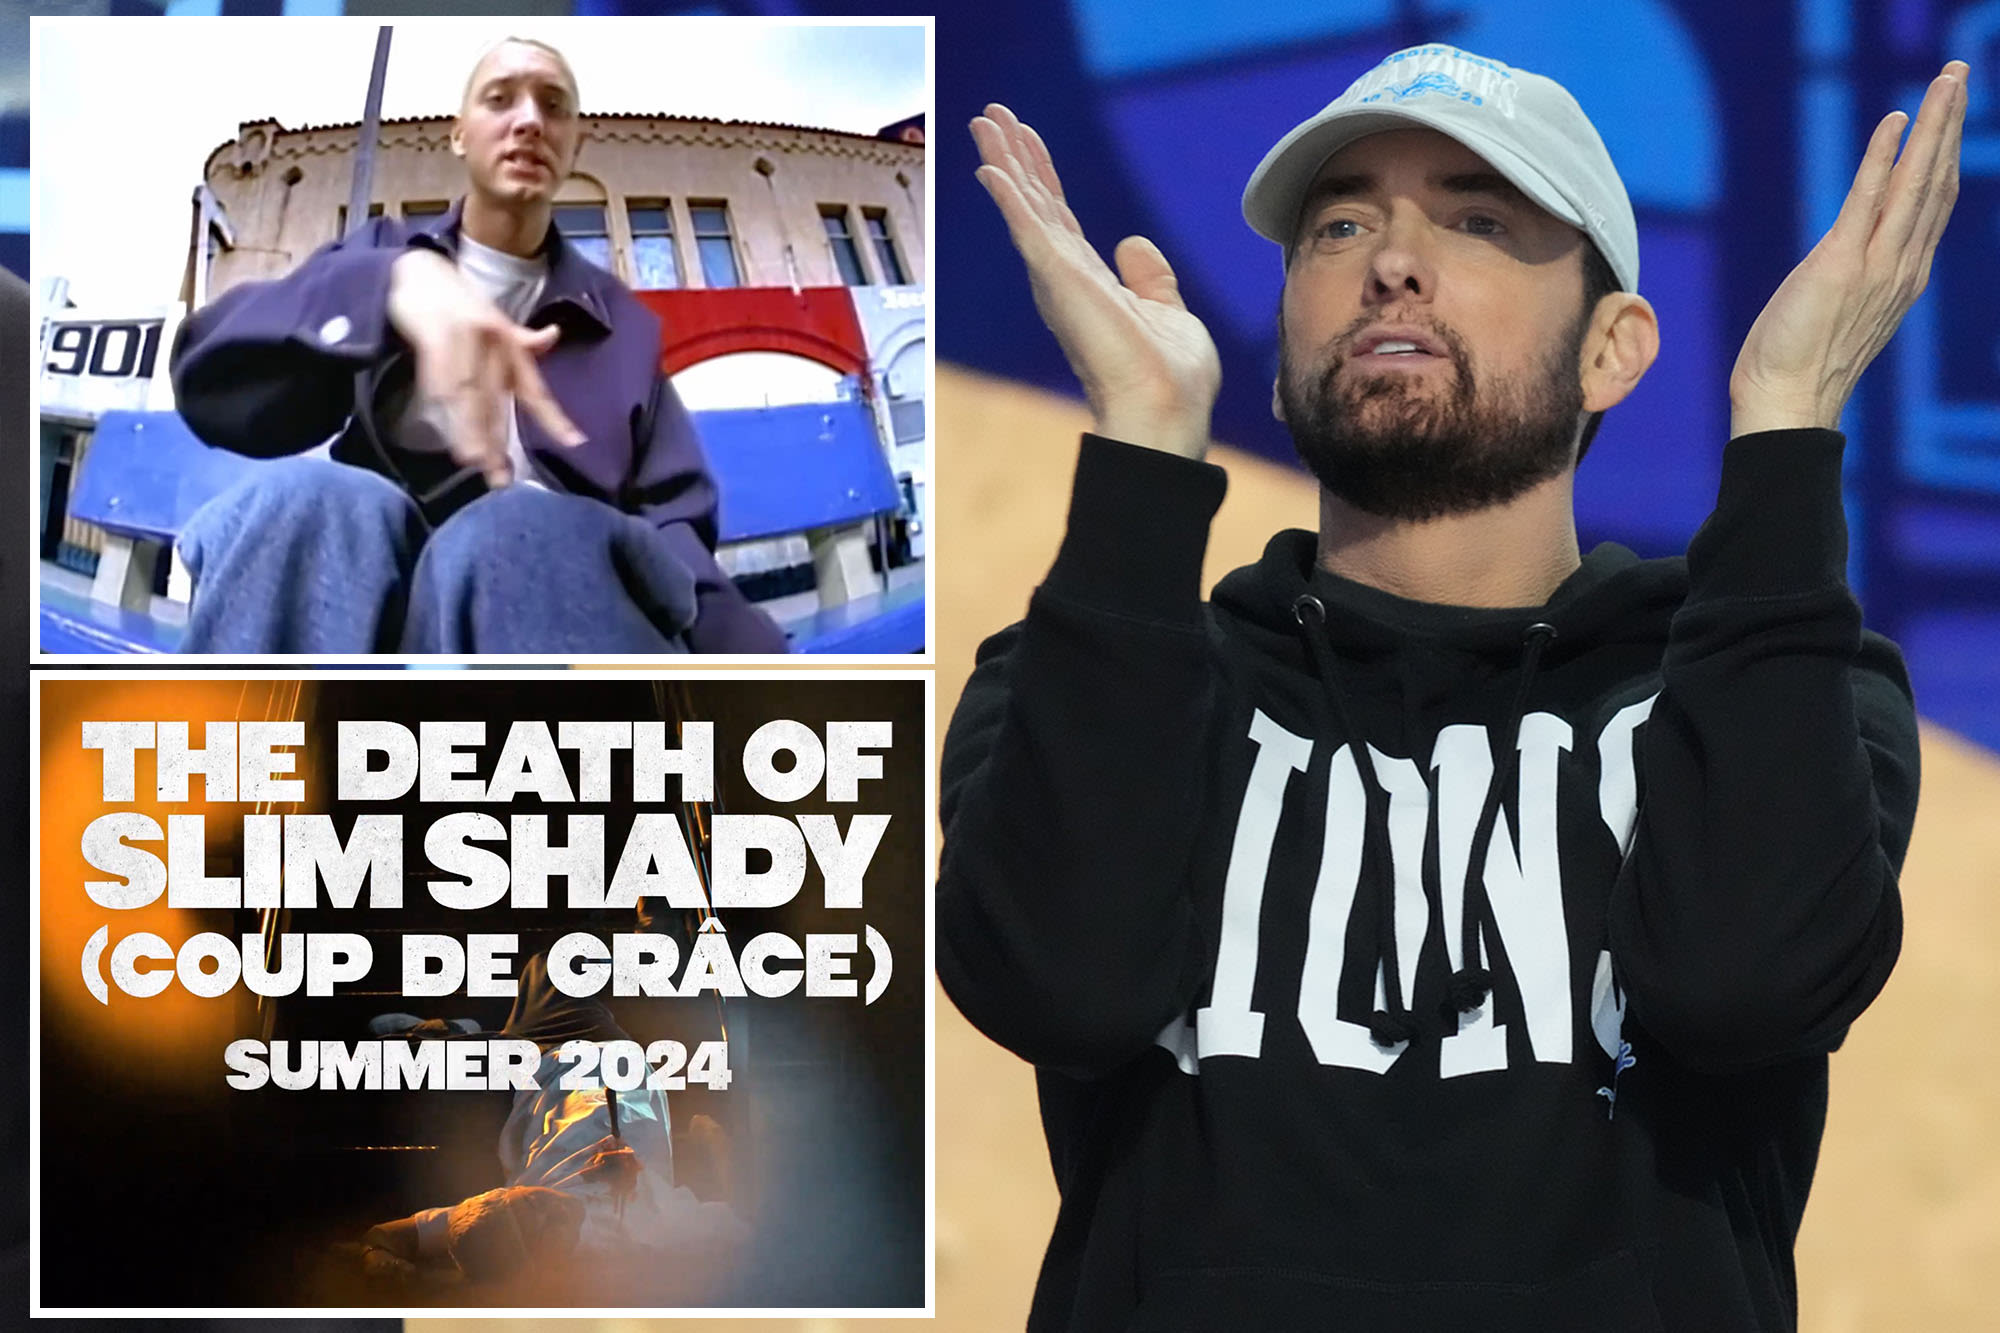 Eminem’s new album announcement is worrying fans: ‘The end of his rap career’